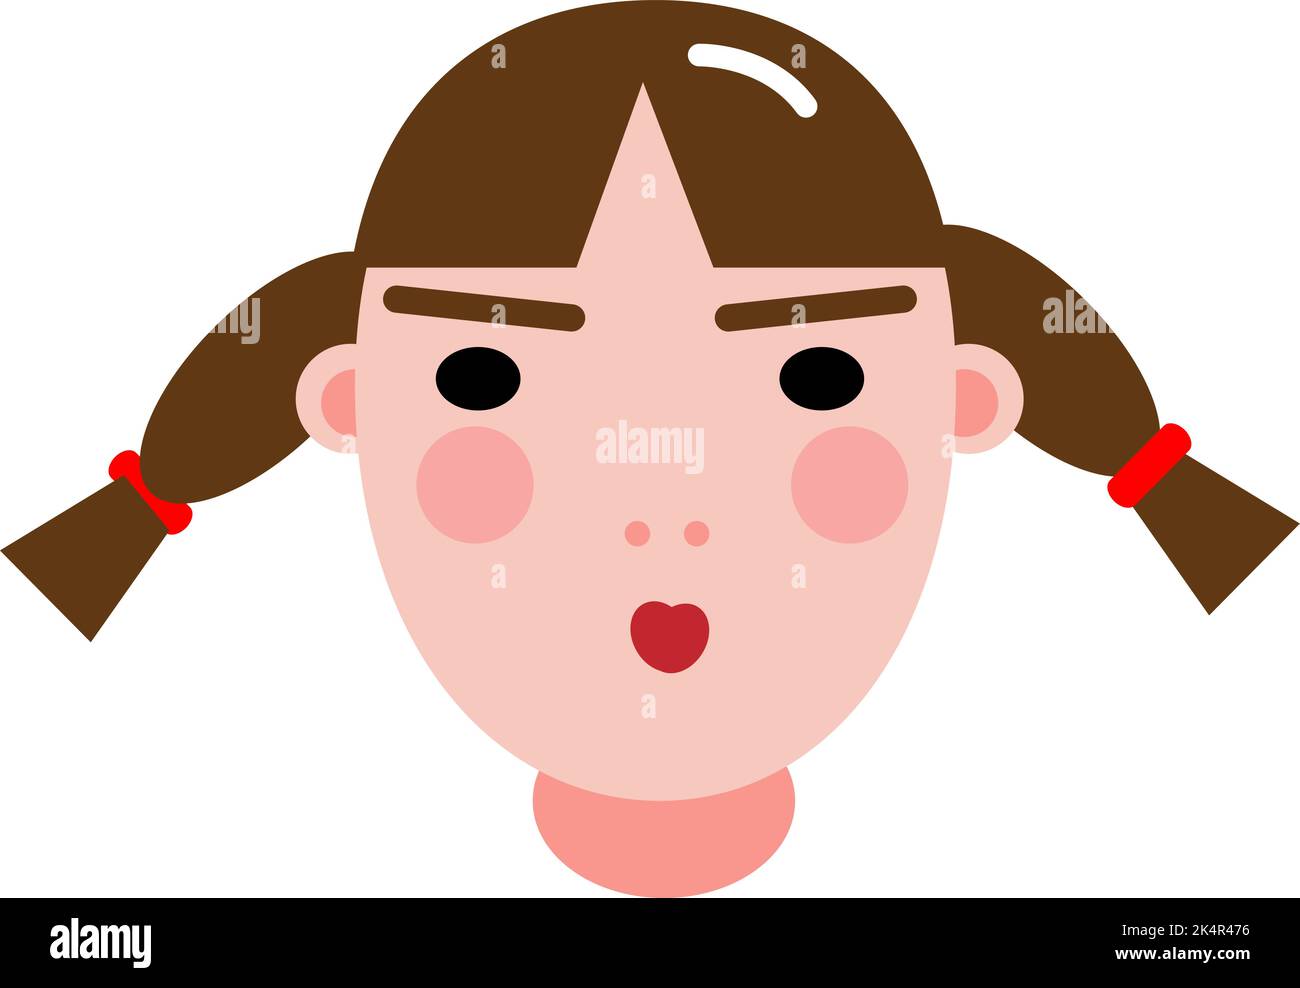 Anime Girl with a Bow in Her Hair Stock Vector - Illustration of